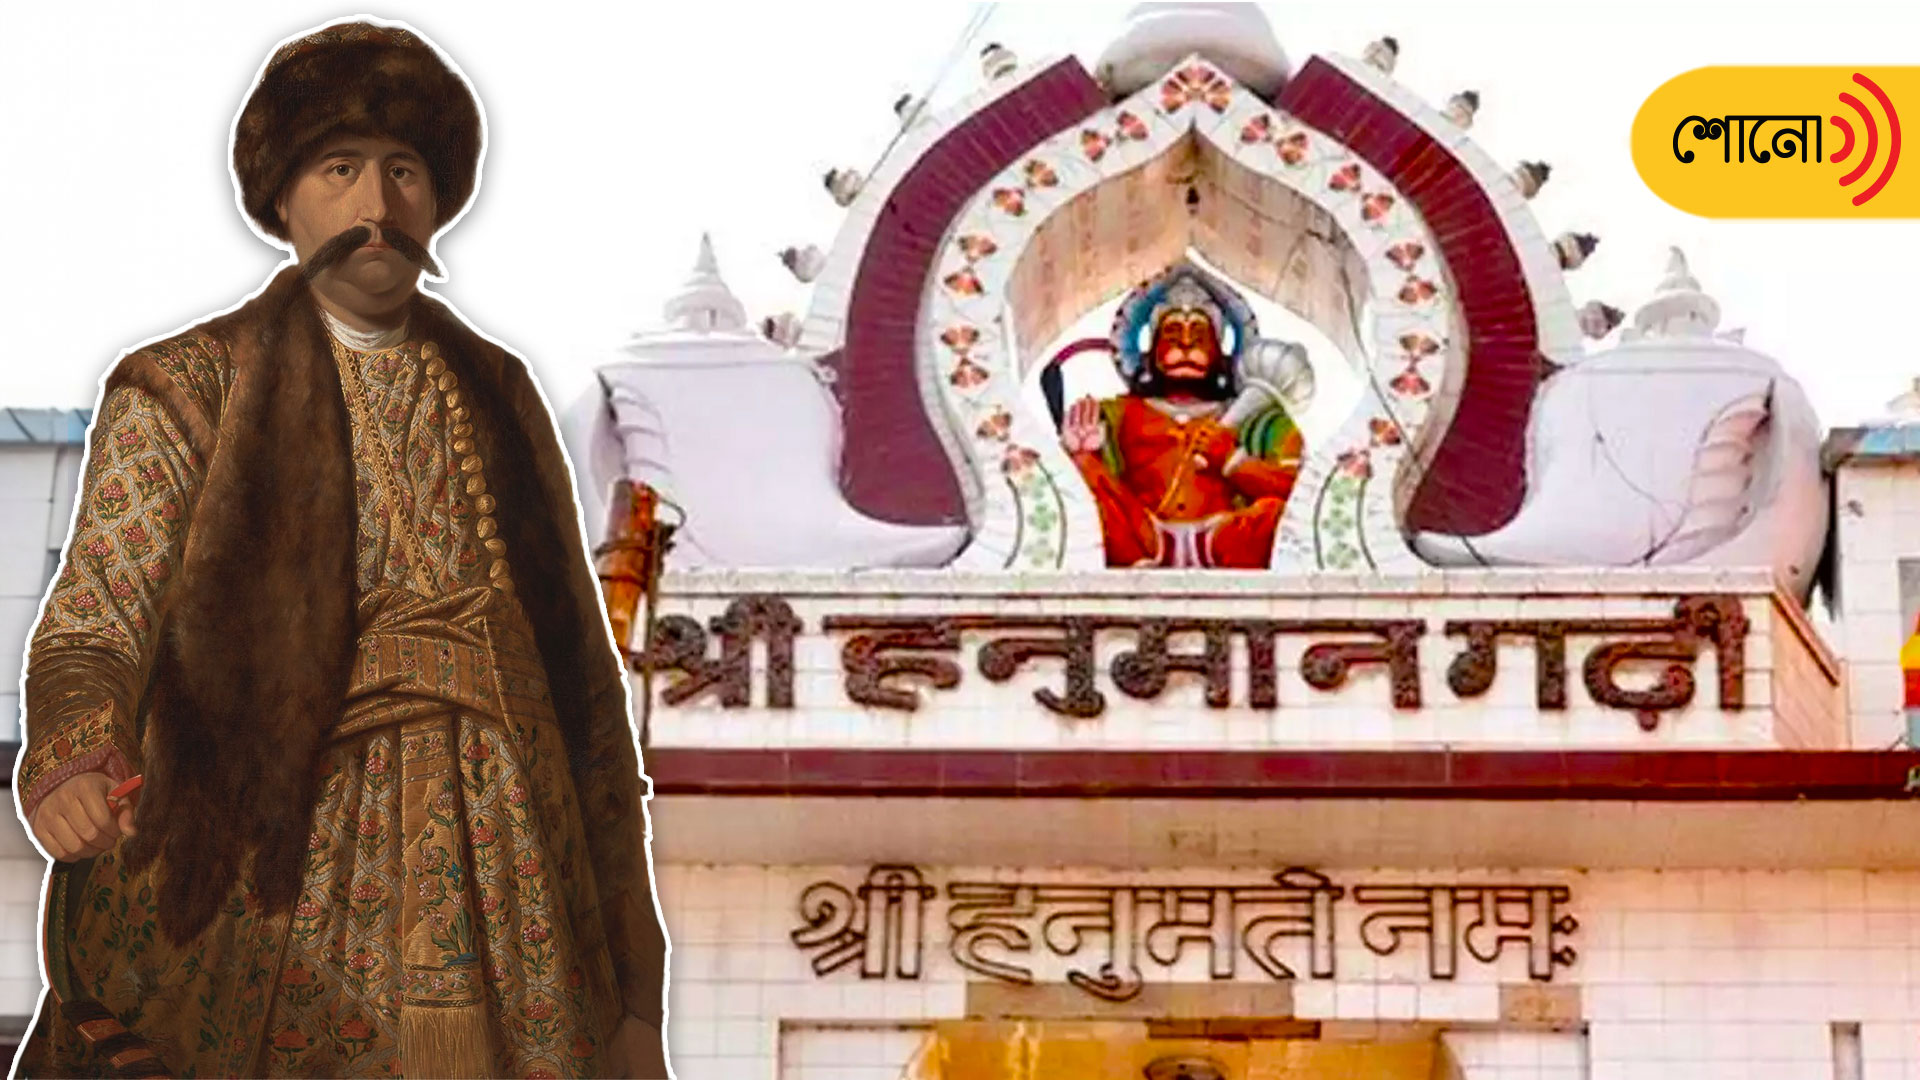 know more about the Muslim Nawabs who built Hindu temples